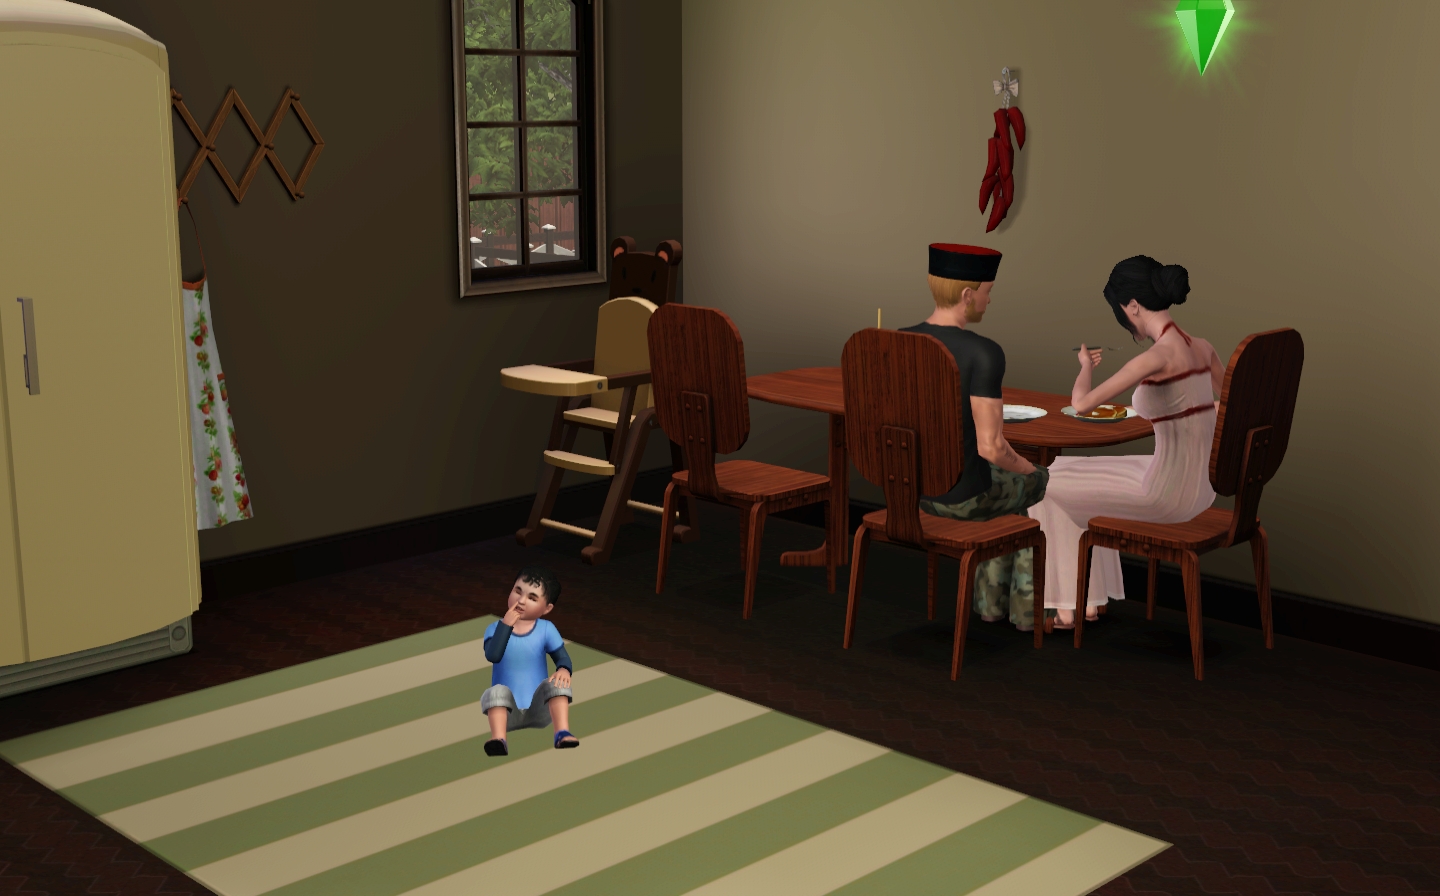 For the second part of Alpha Paradise (2018), the artist created a traditional Cossack family in the Sims 3 video game